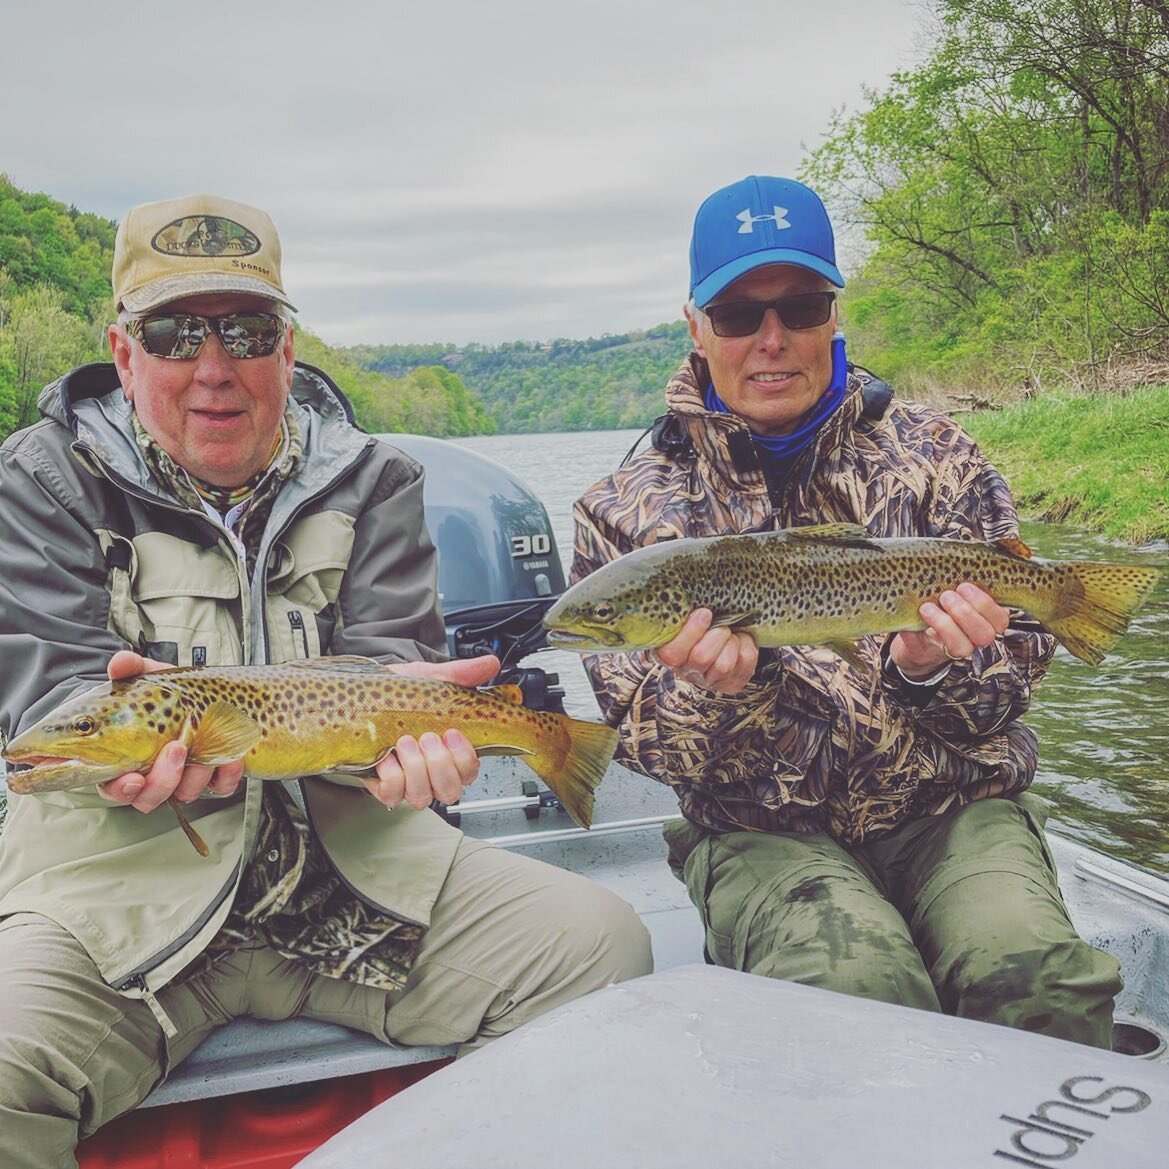 Lots of caddis lately...more to come! 
&bull;
&bull;
&bull;
Thanks for hooking us up @risingriverguides 
&bull;
#riffletripoutfitters #scottflyrods #rossreels #whiteriver #arkansas #flyfish #flyfisharkansas #browntown #browntrout #browntroutnation #t